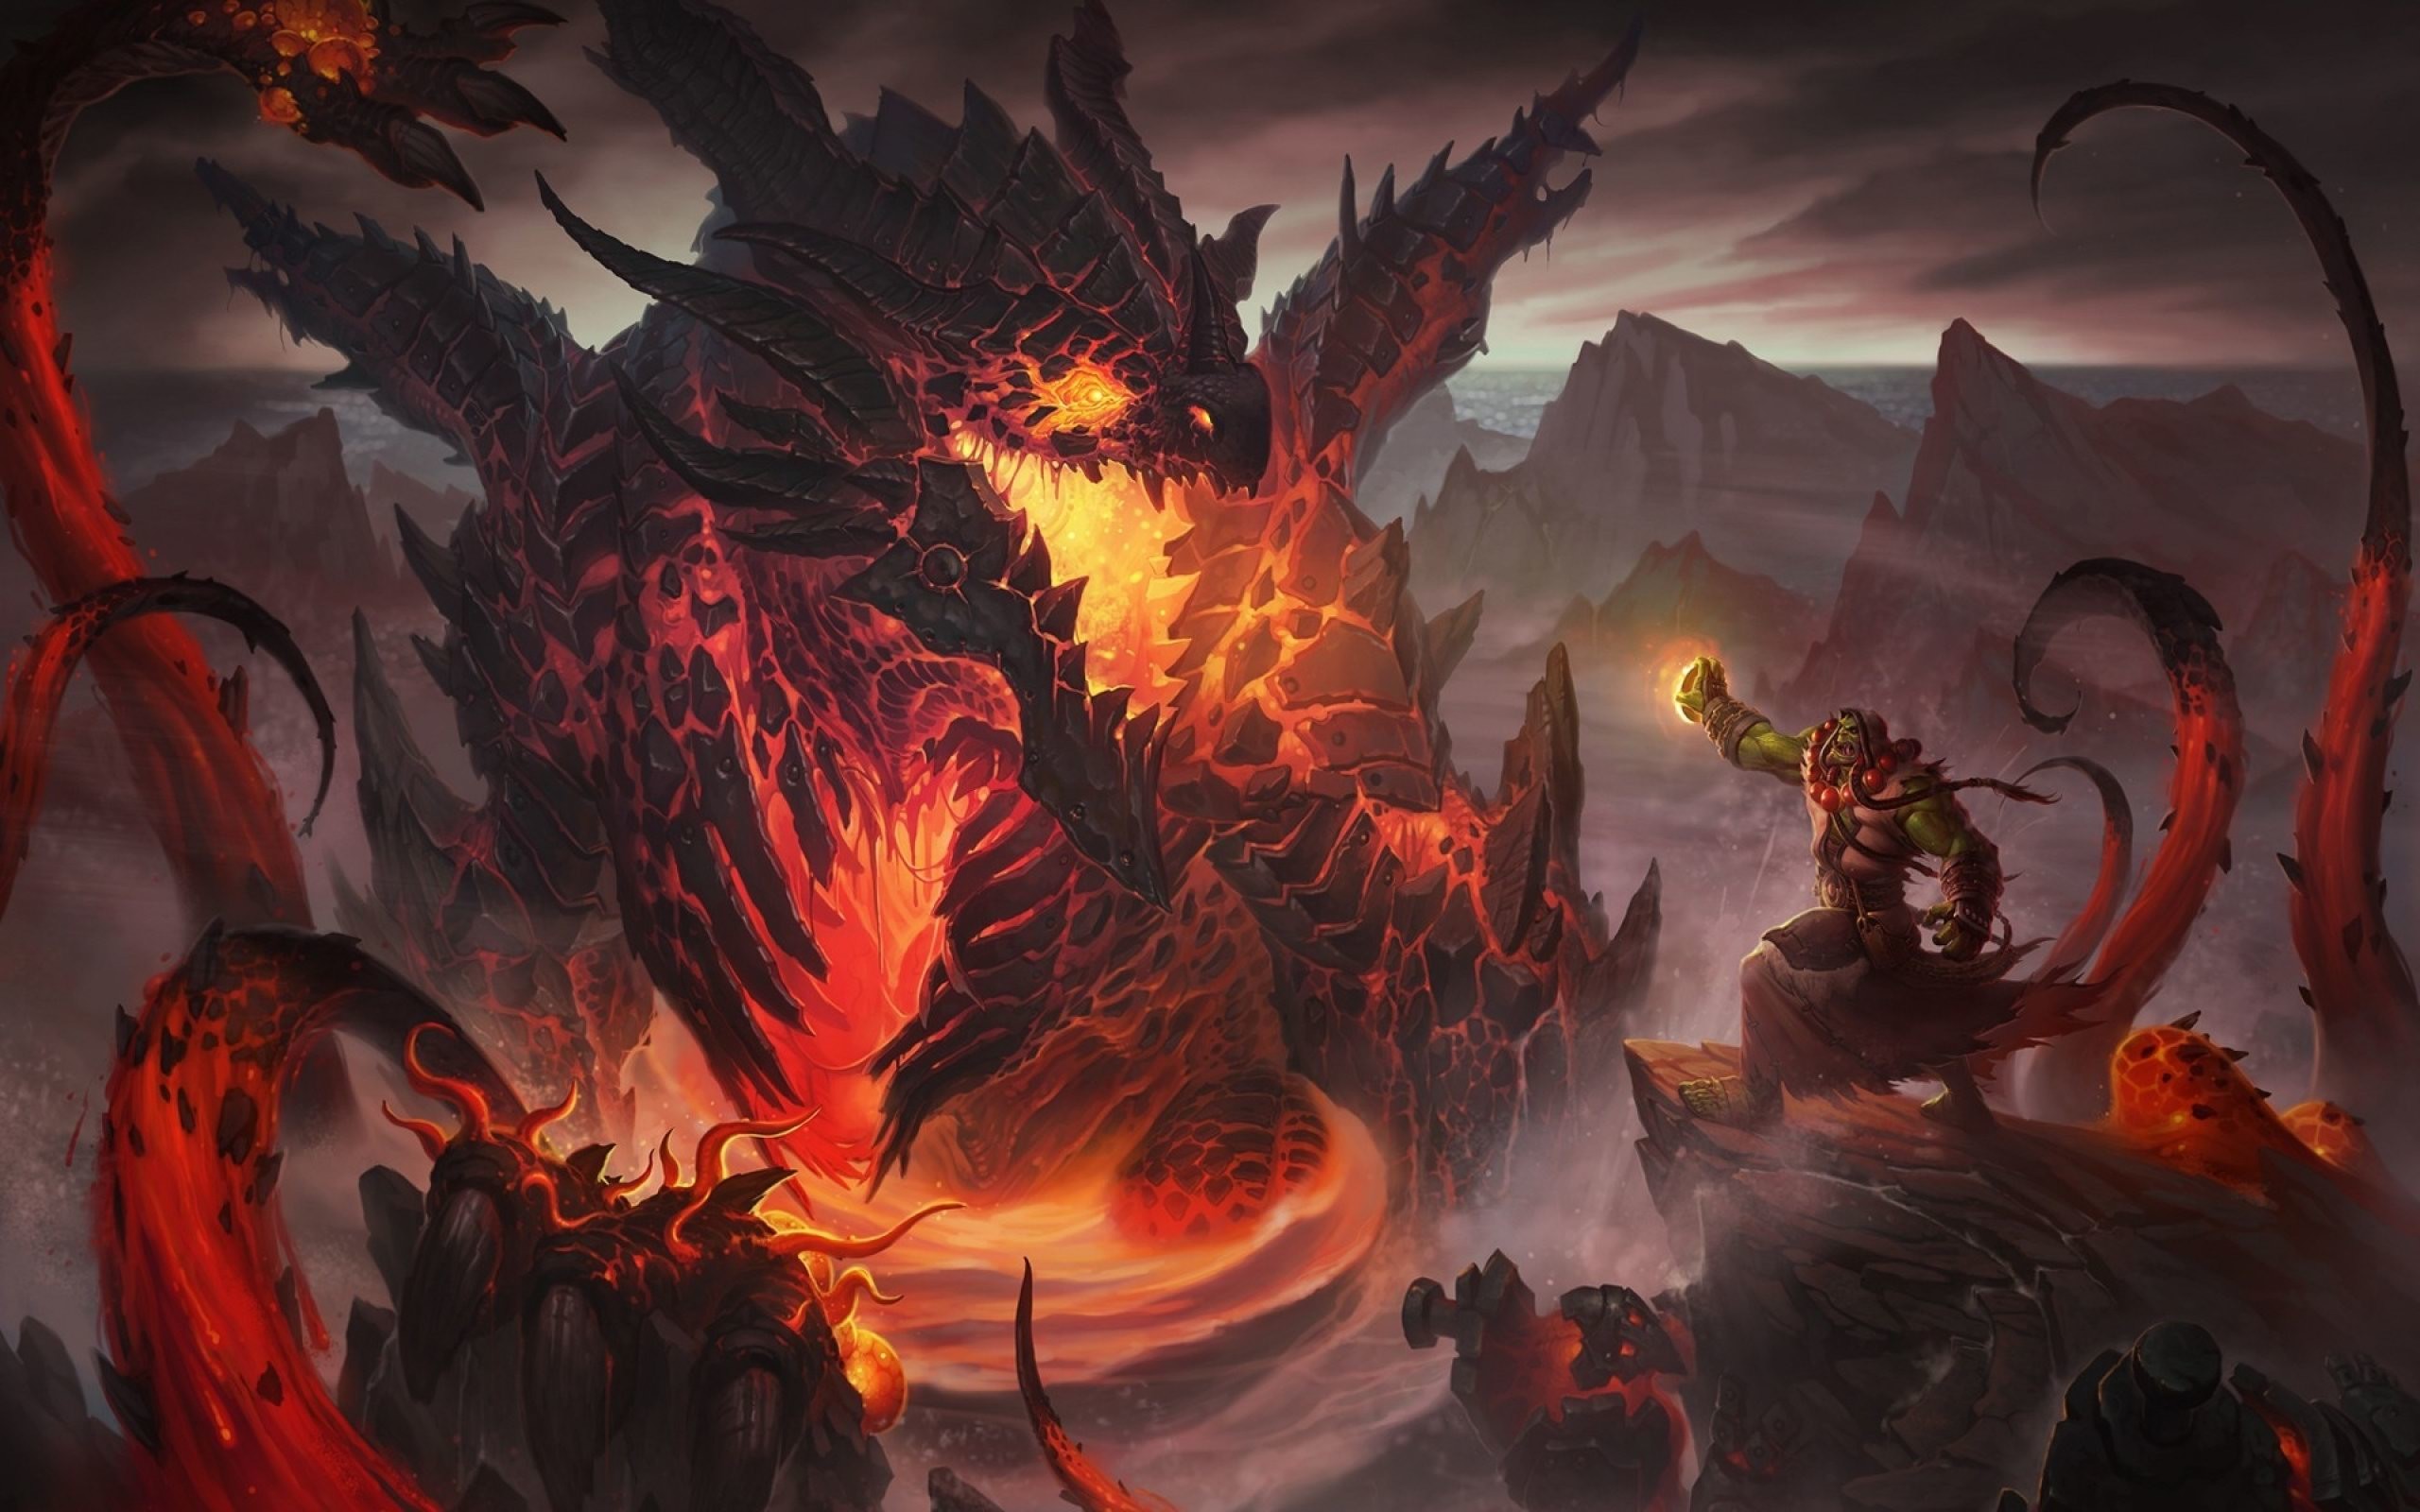 2560x1600 World of Warcraft cataclysm dragons orc thrall wallpaper ( / Wallbase.